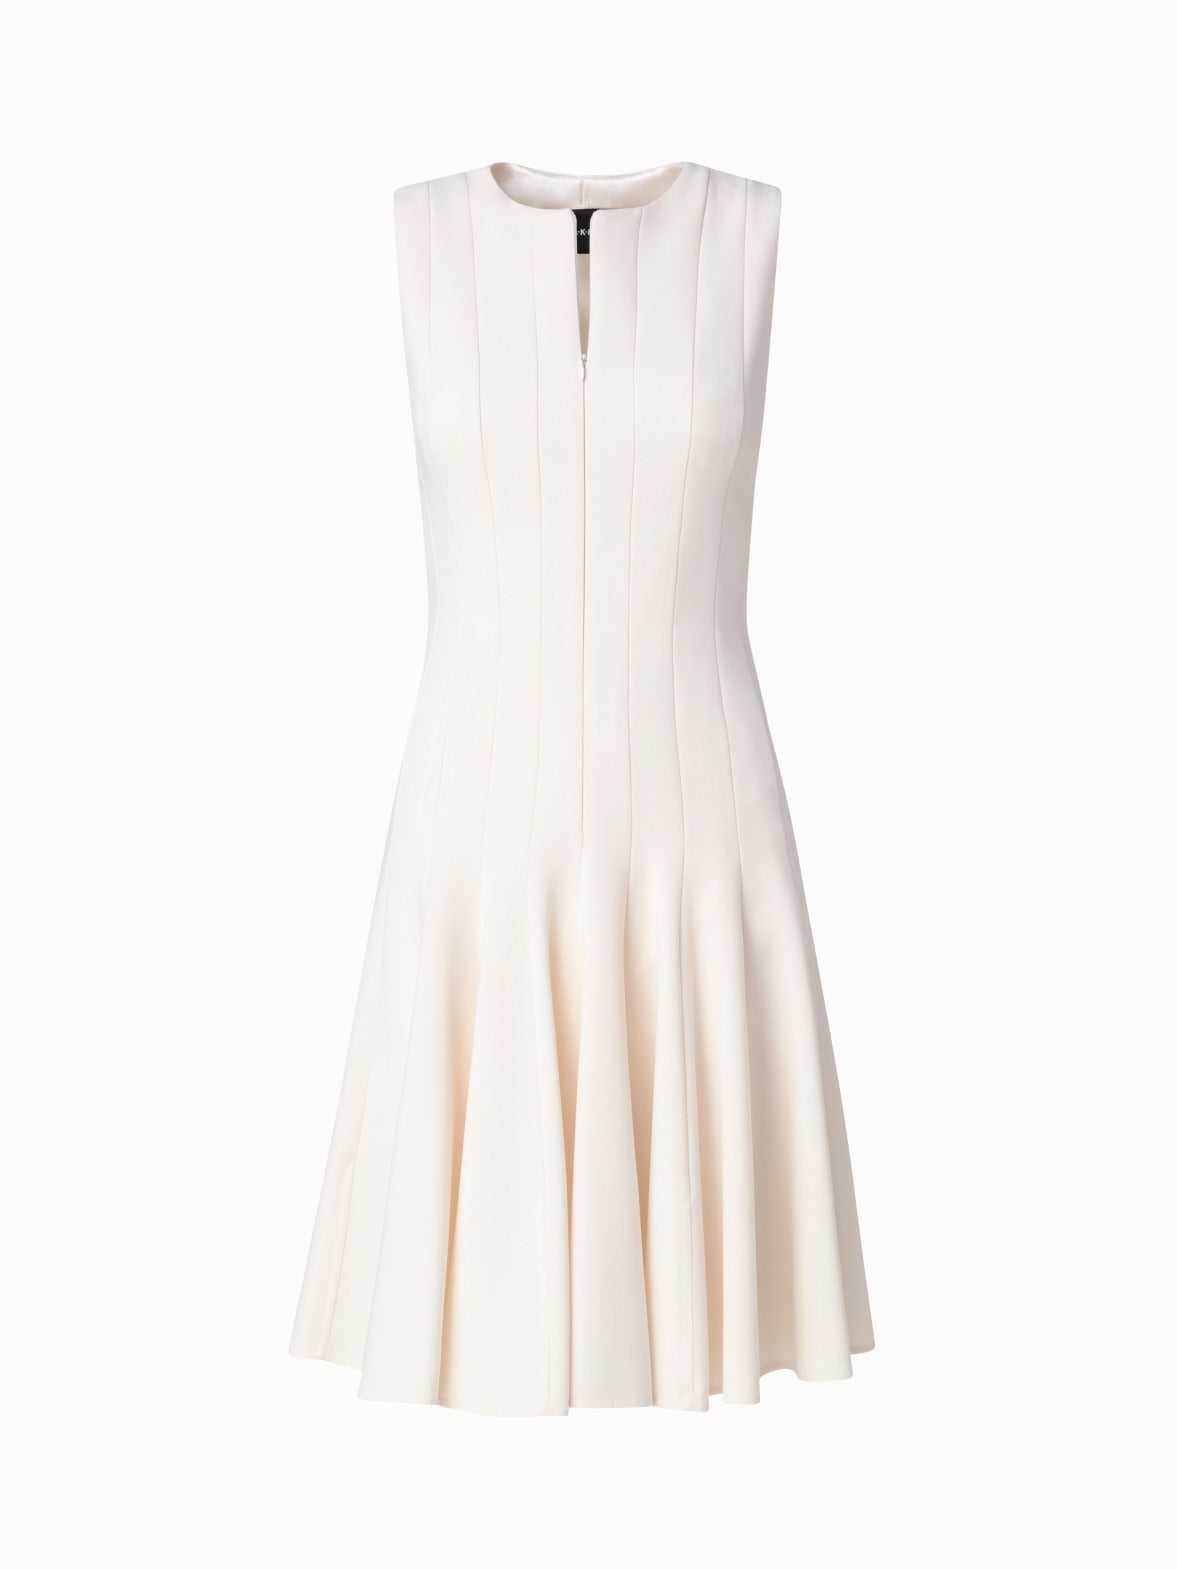 Wool Double-Face Dress with Skaters Pleats